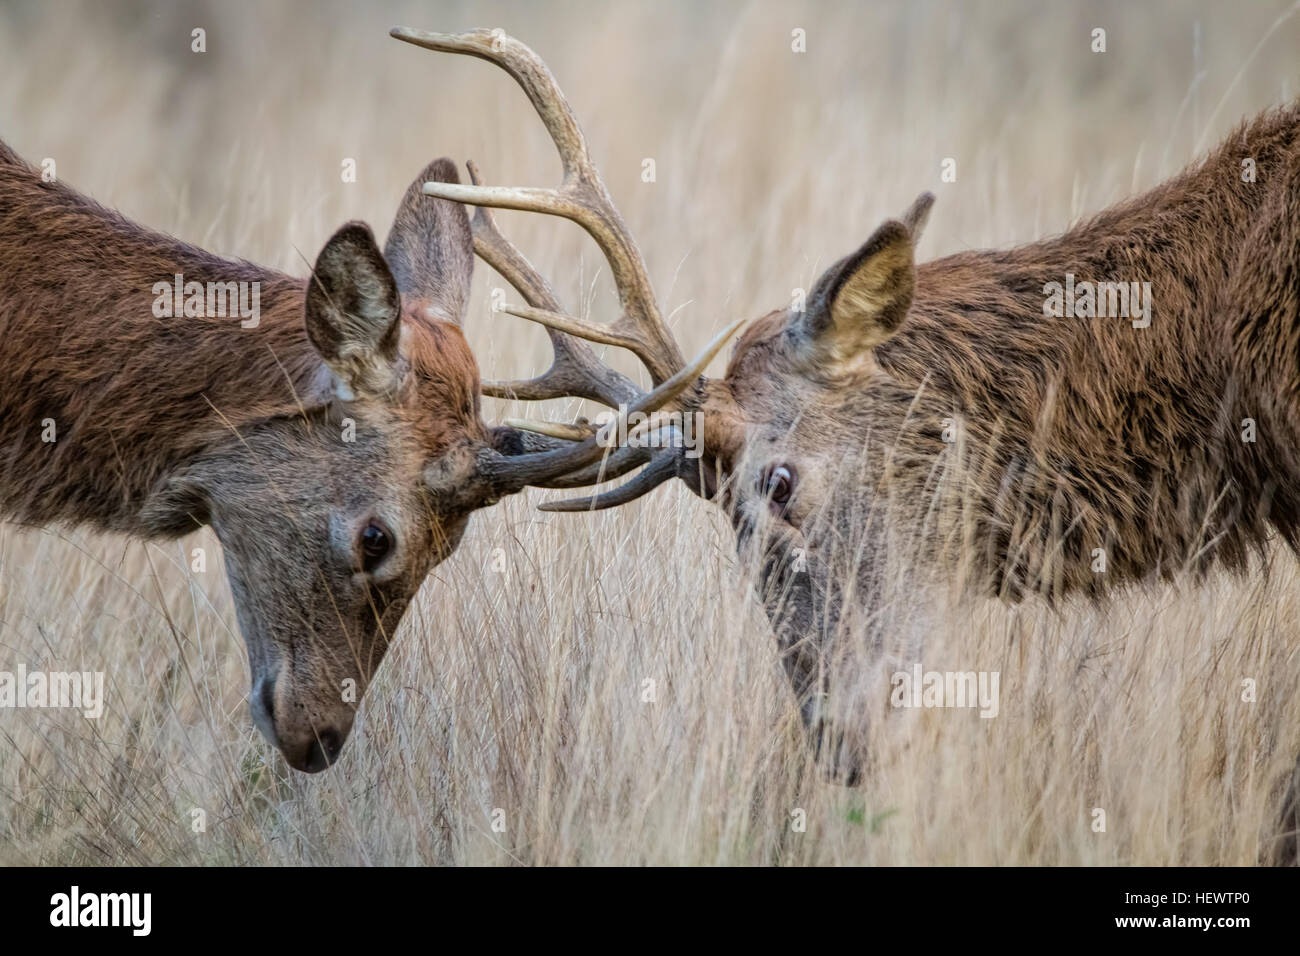 Deer Rutting.  Two animals fight during  mating season. Stock Photo